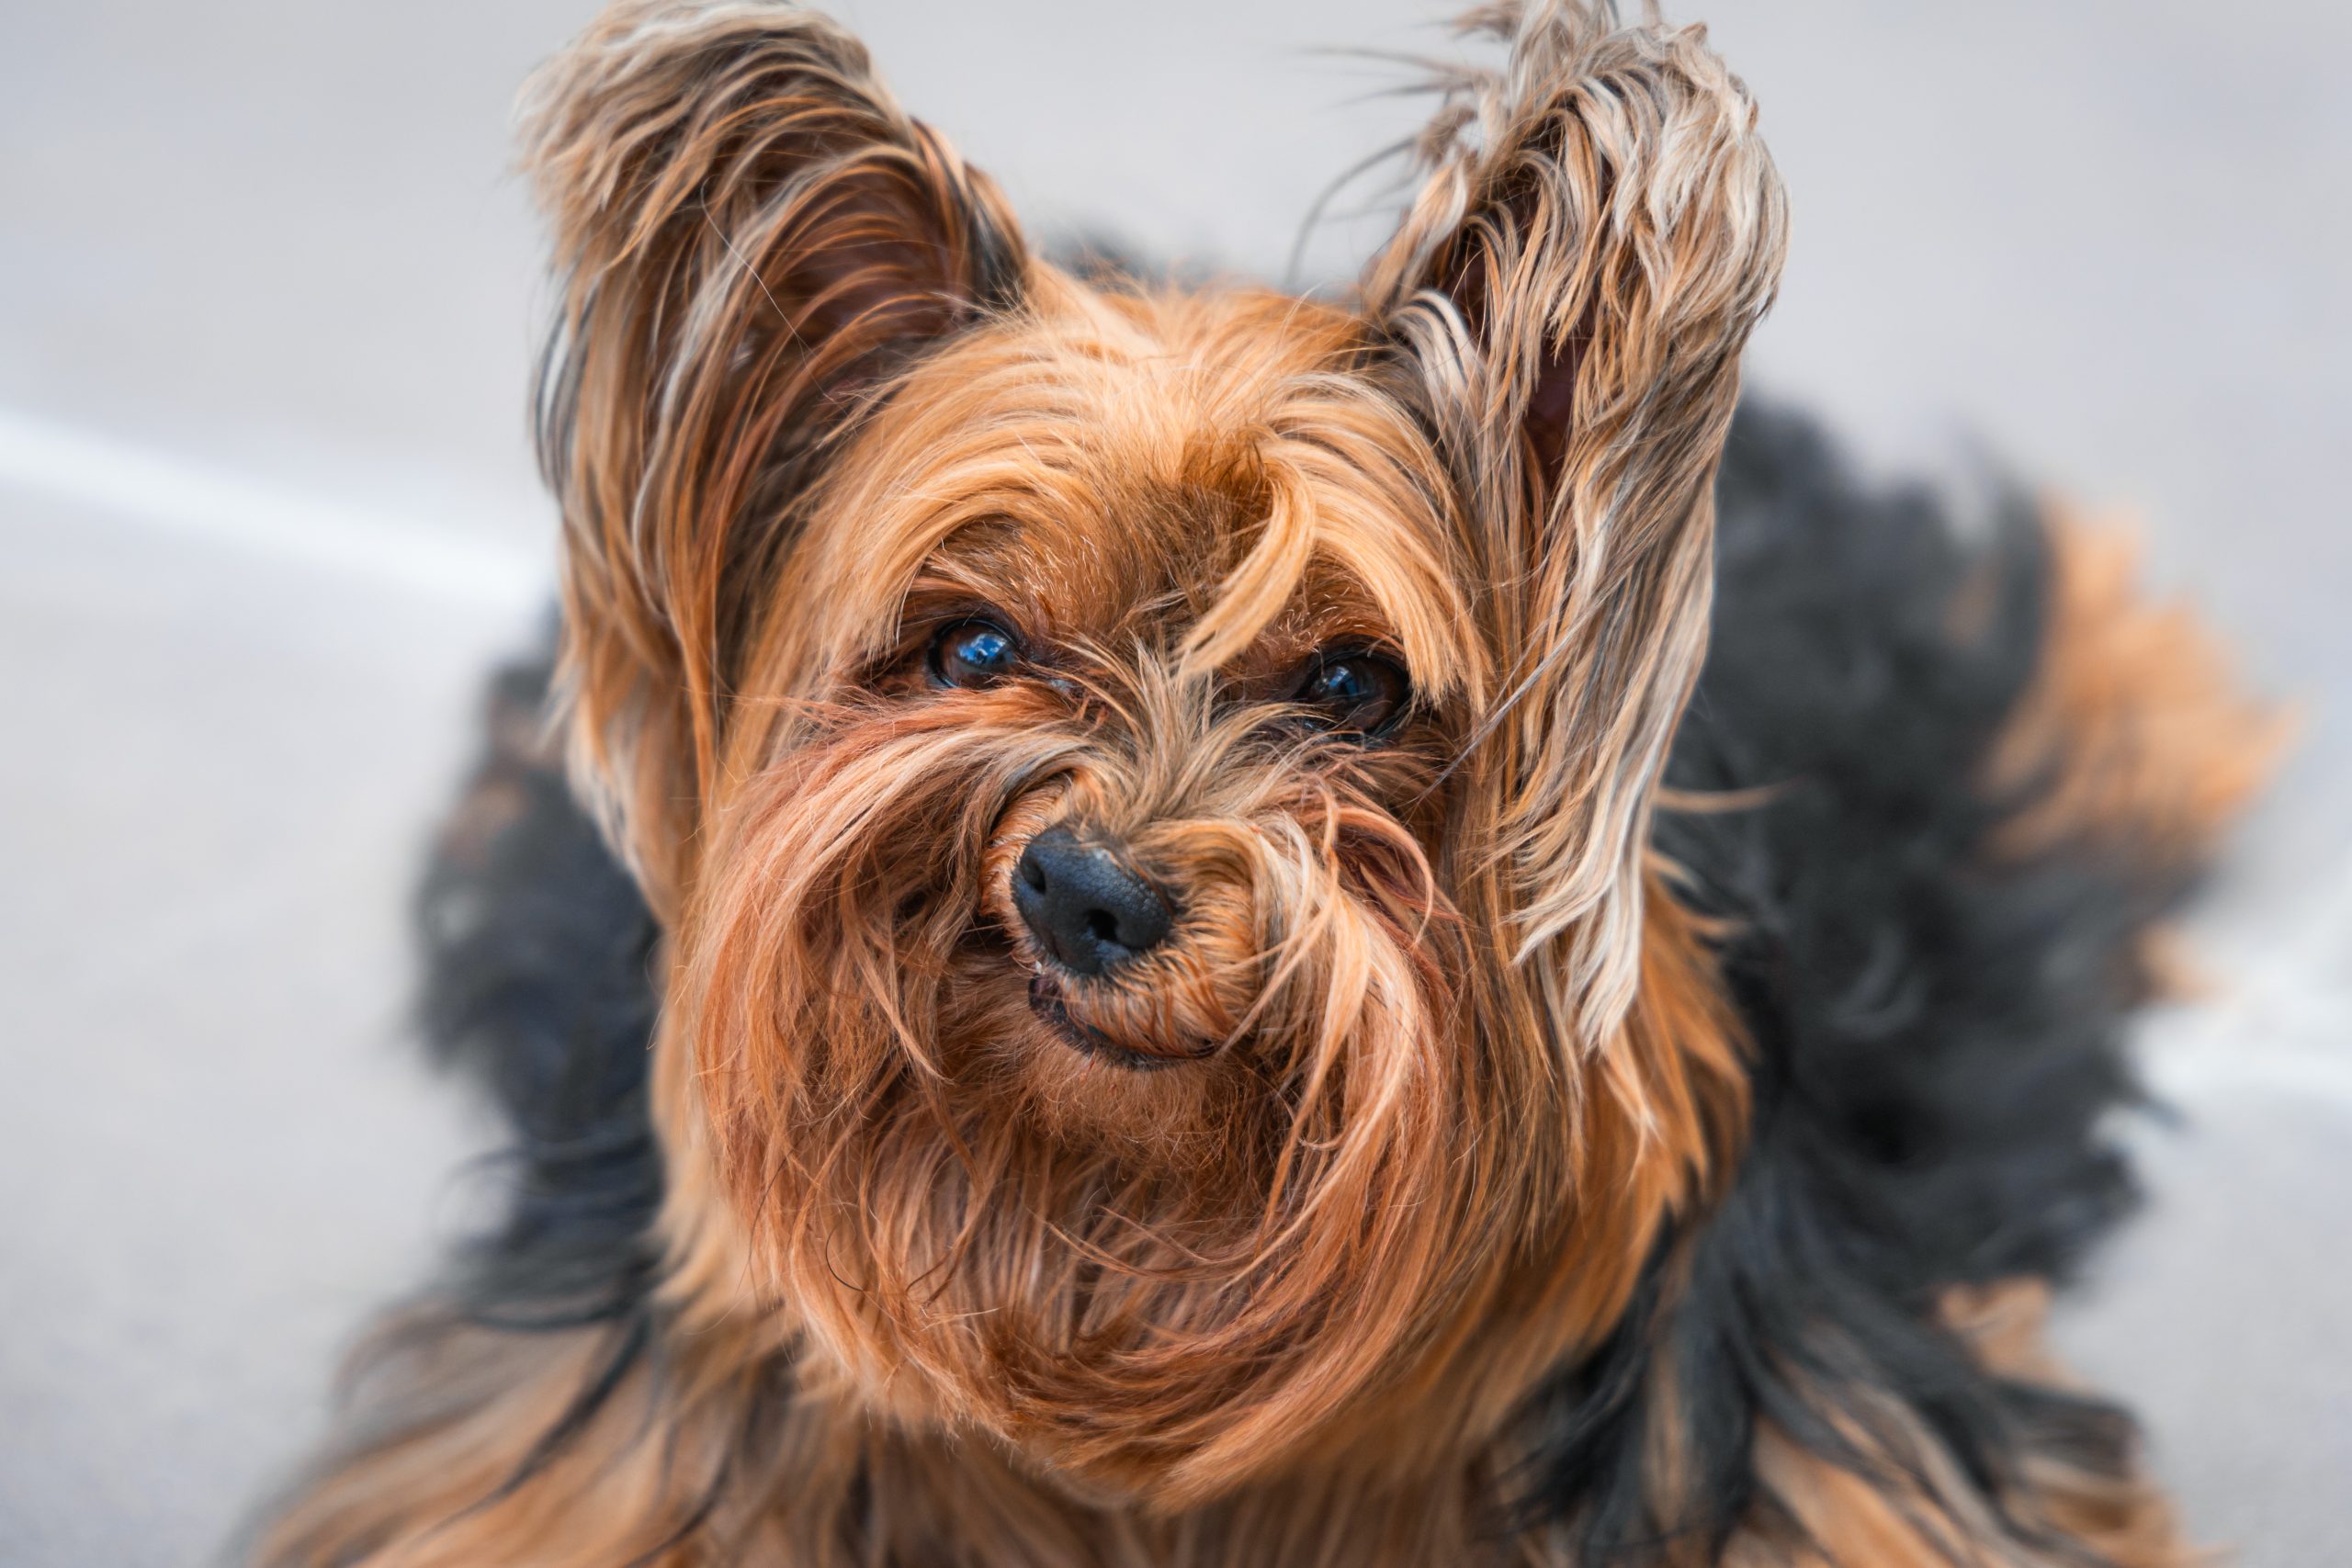 The Comedy Pet Photography Awards 2024 Luiza Ribeiro de Oliveira Belo Horizonte Brazil Title: Grumpy Dog Description: Meet Nick Barry, a 5-year-old yorkie with a special talent for hilarius expressions. This may not be his most flattering photo, but that frown is undeniably captivating - a true portrait of a dog who doesn't need smiles to win our hearts. Animal: Yorkshire Terrier Location of shot: Brazil